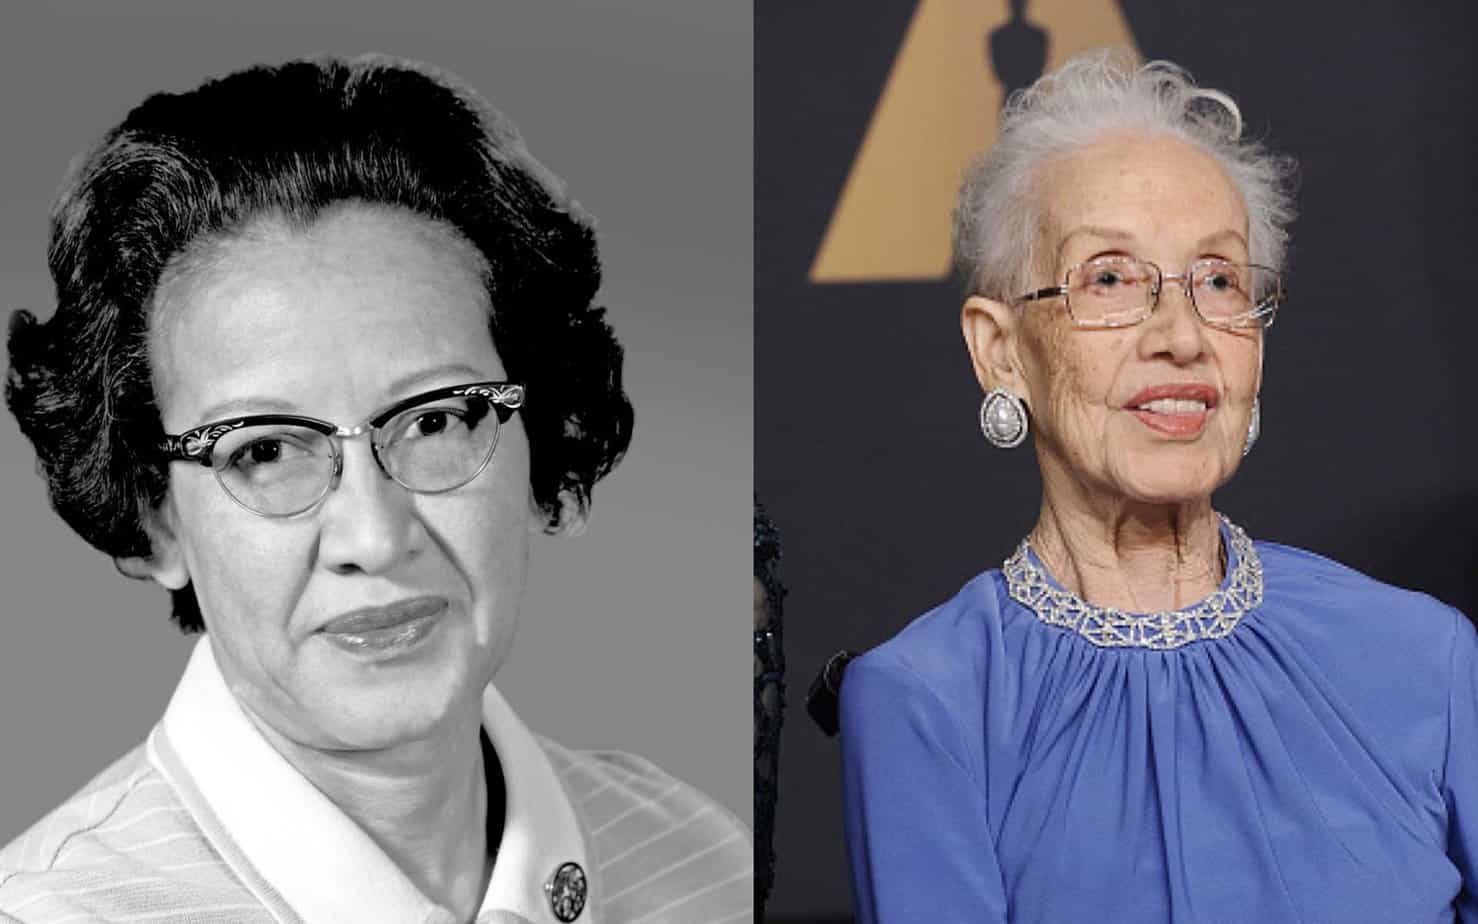 Katherine Johnson, The First African American Woman to Work with NASA, dies at 101.